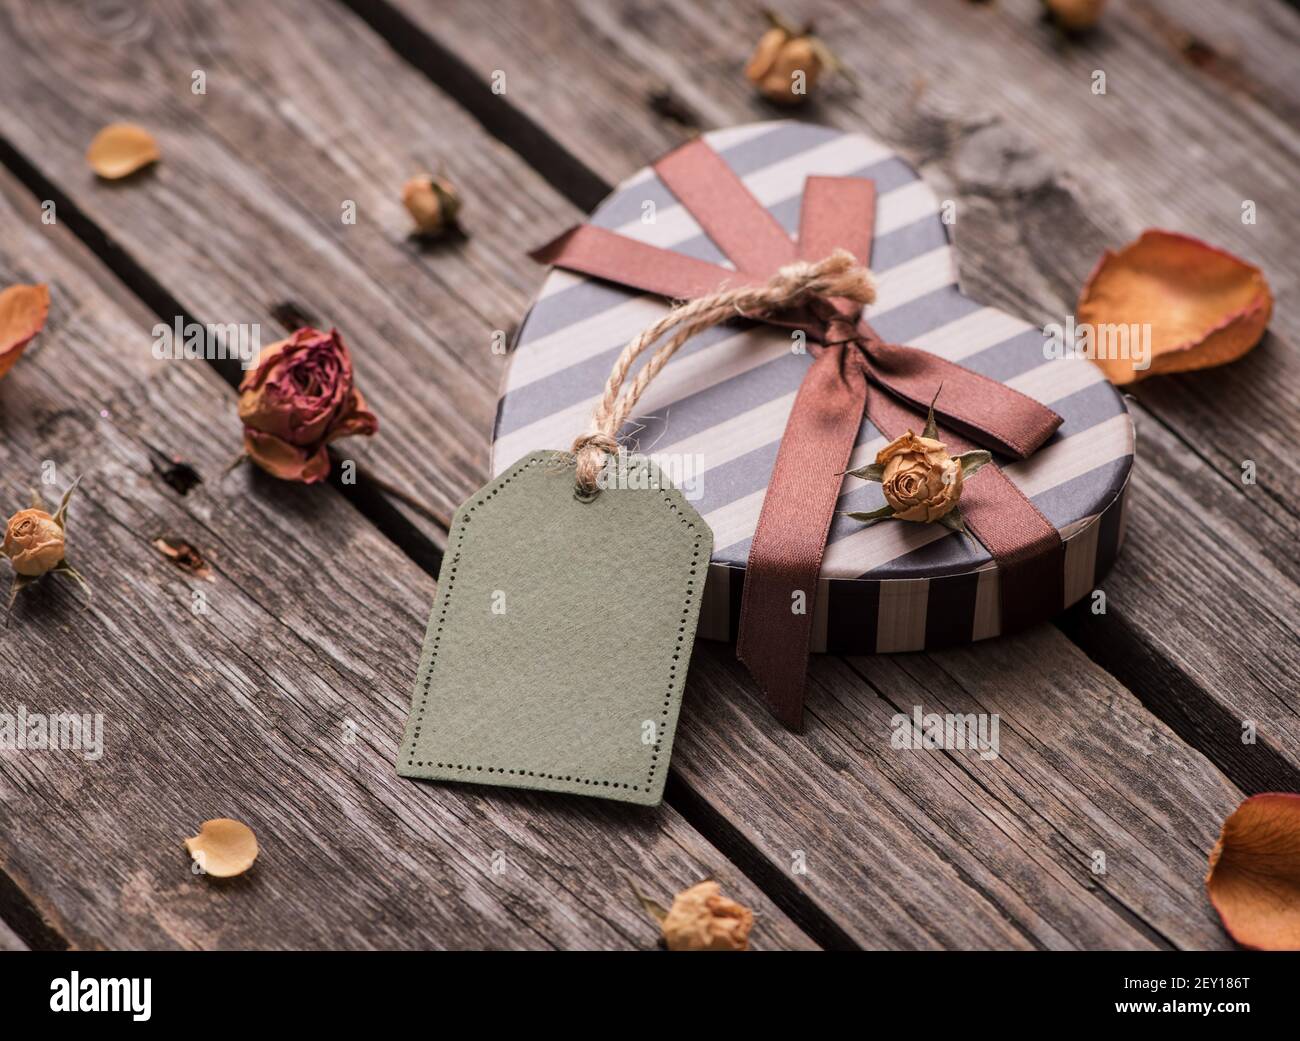 Gift tag and heart shaped gift box Stock Photo